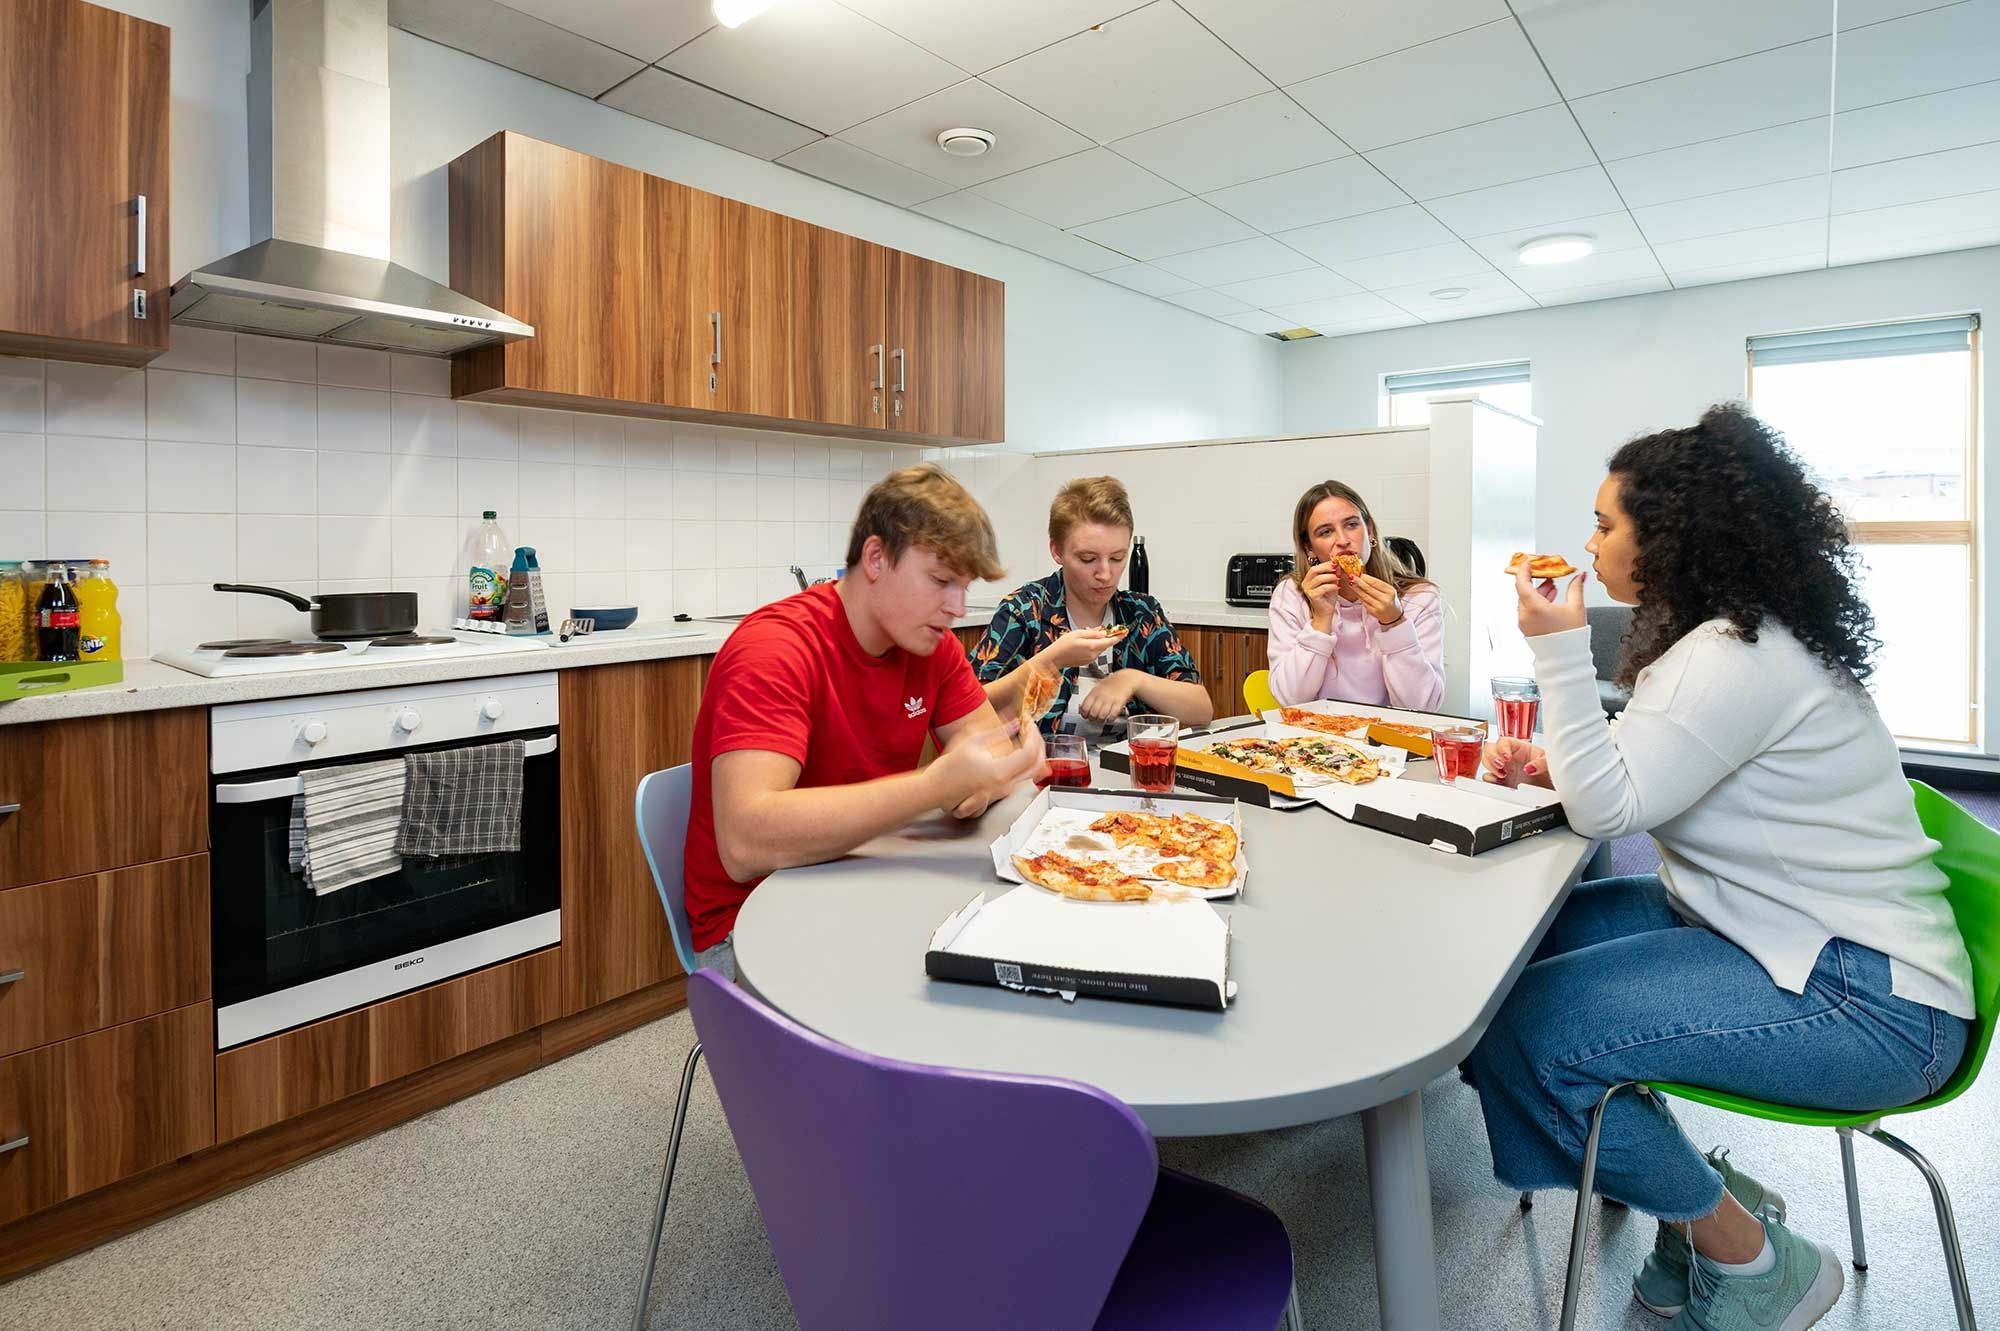 four students eating pizza at a kitchen table in Windsor House accommodation